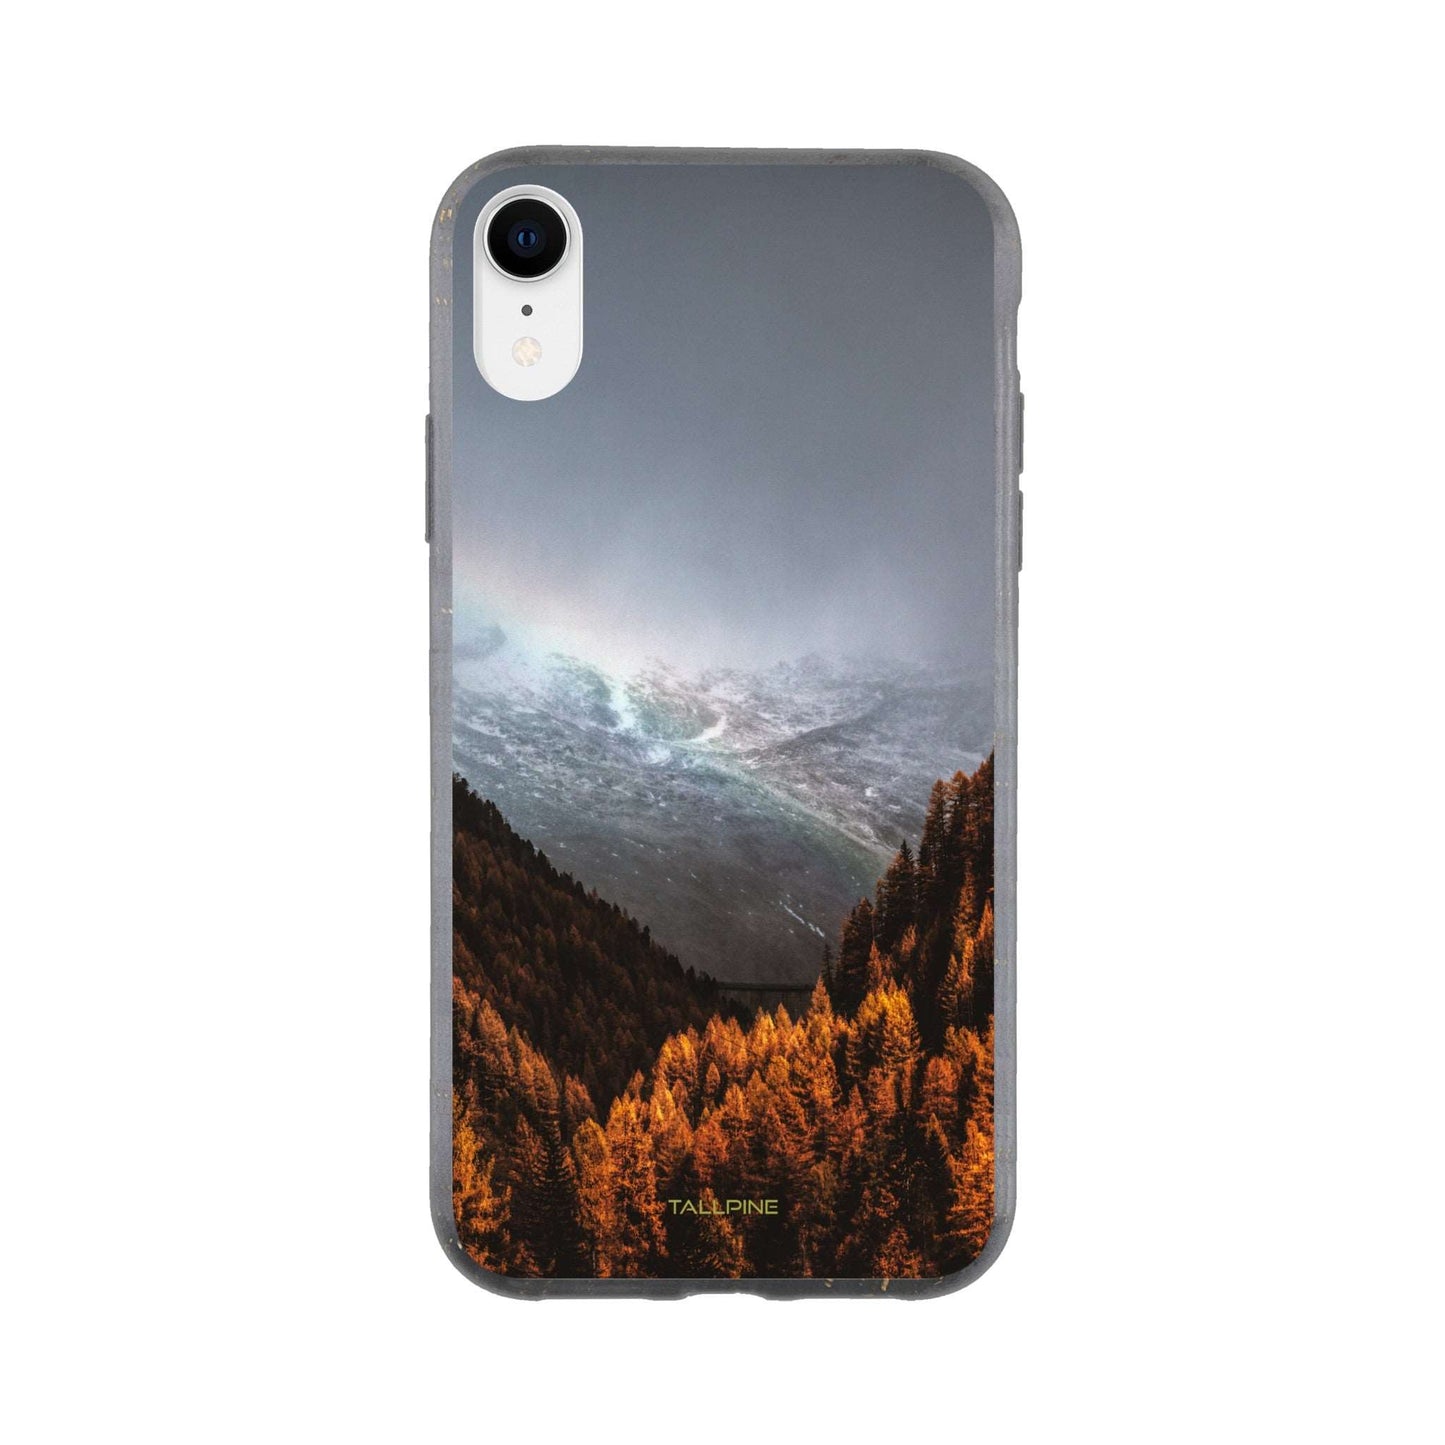 Autumn Mountain - Eco Case iPhone XR - Tallpine Cases | Sustainable and Eco-Friendly Phone Cases - Autumn Mountain Nature